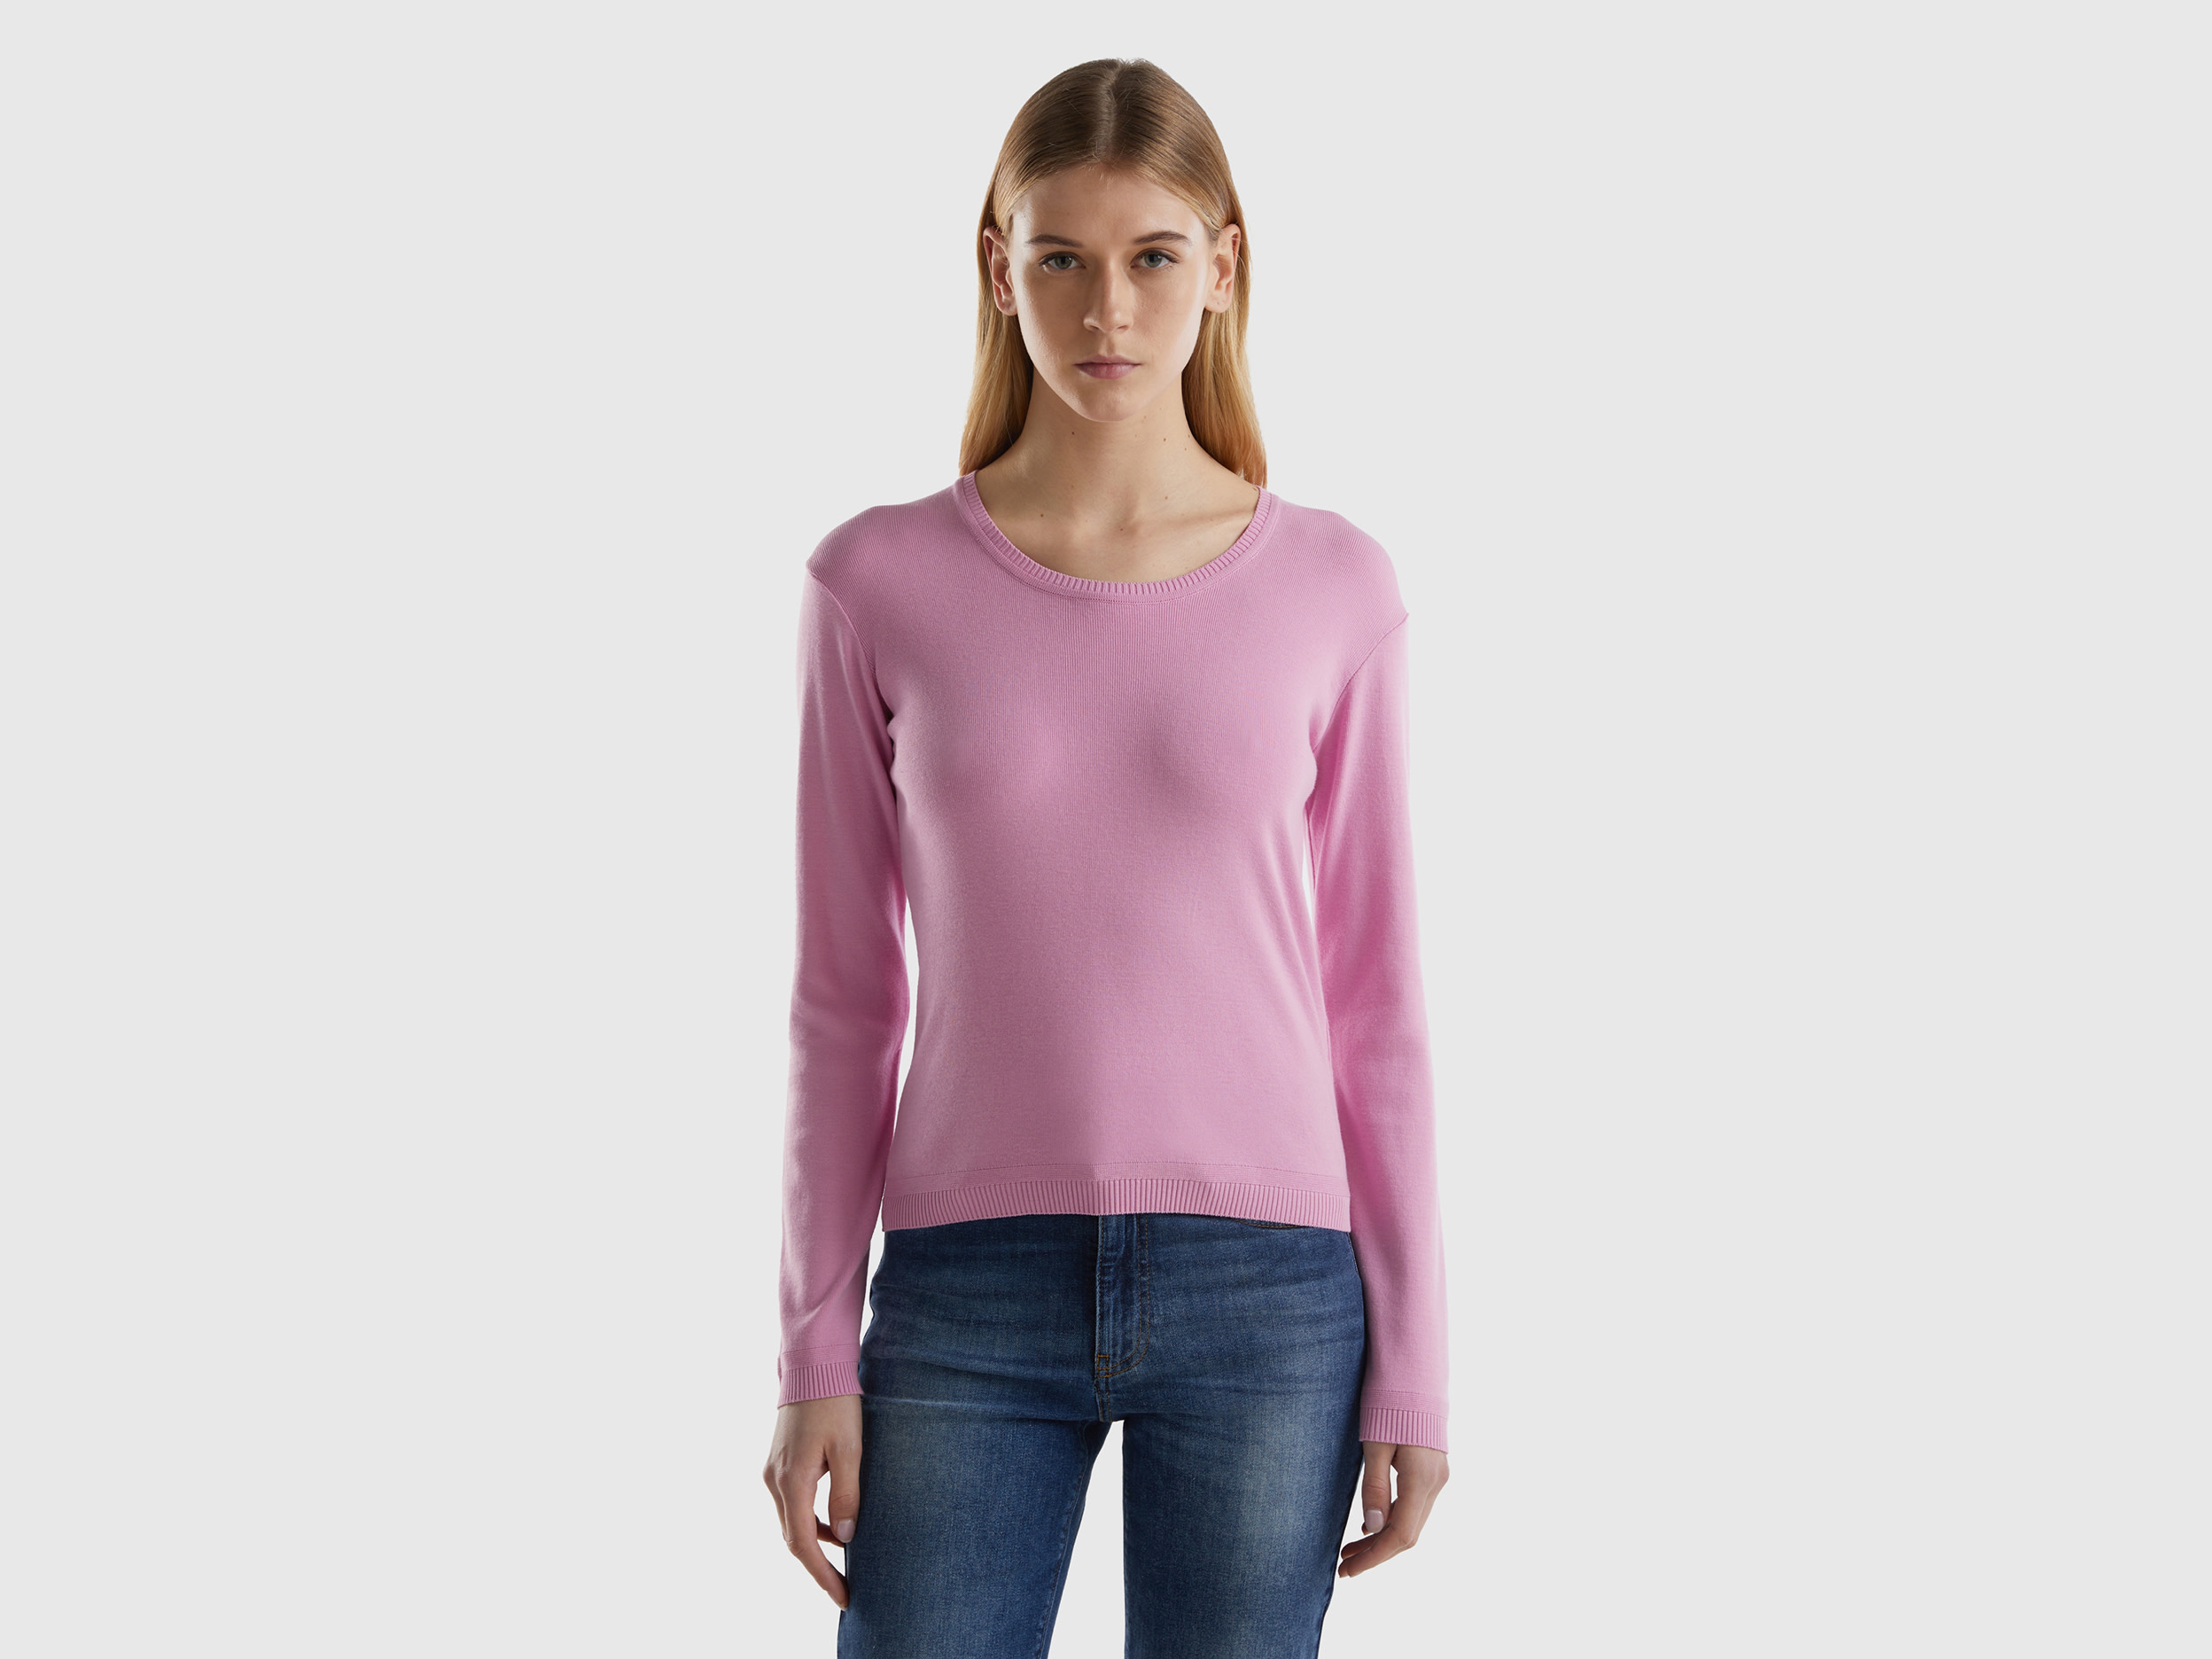 Benetton, Crew Neck Sweater In Pure Cotton, size M, Pastel Pink, Women